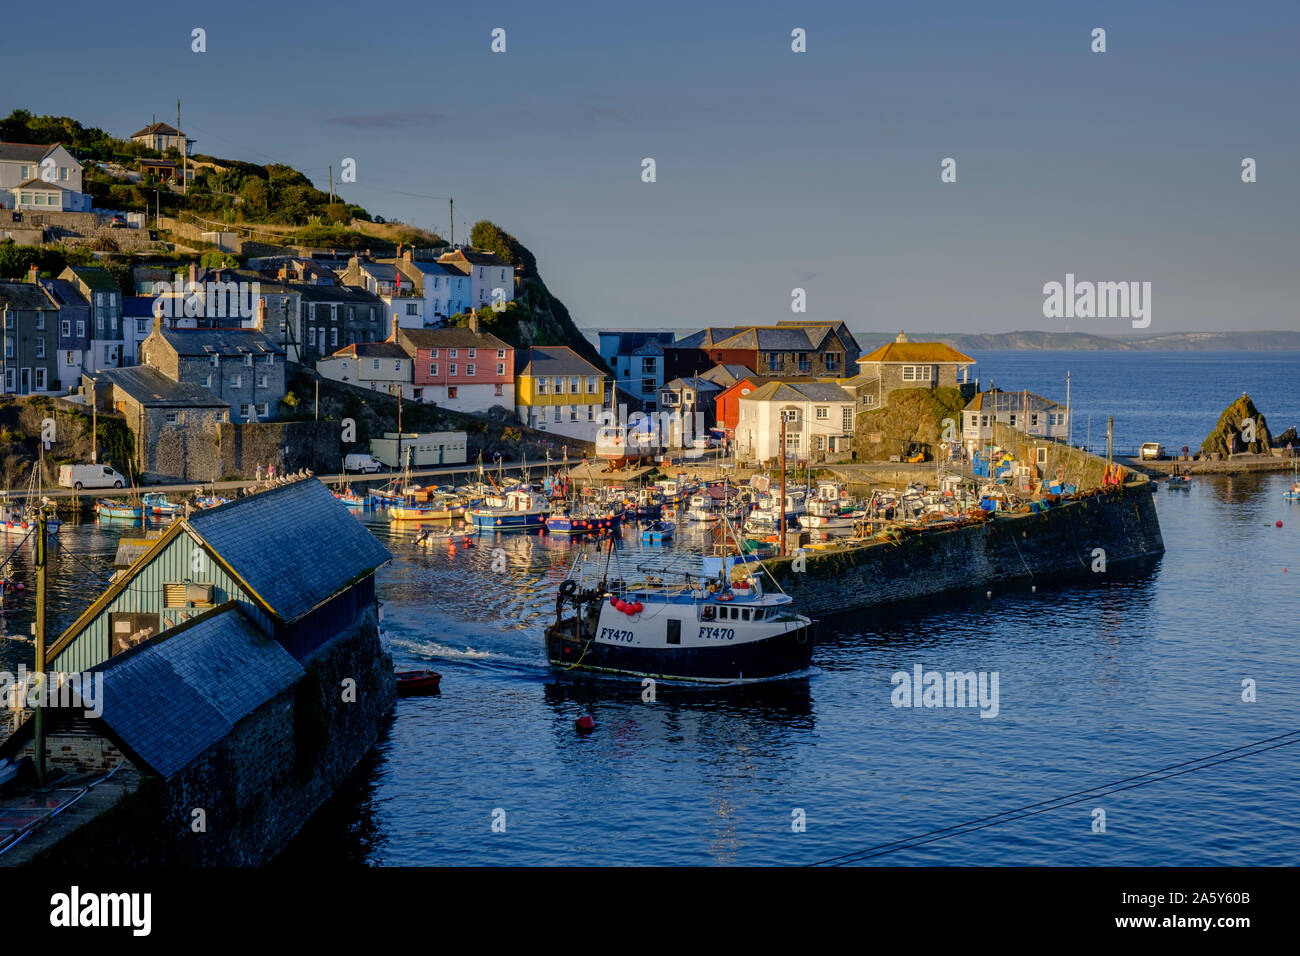 Mevagissey Harbour Mevagissey St Austell Cornwall England in evening light Stock Photo